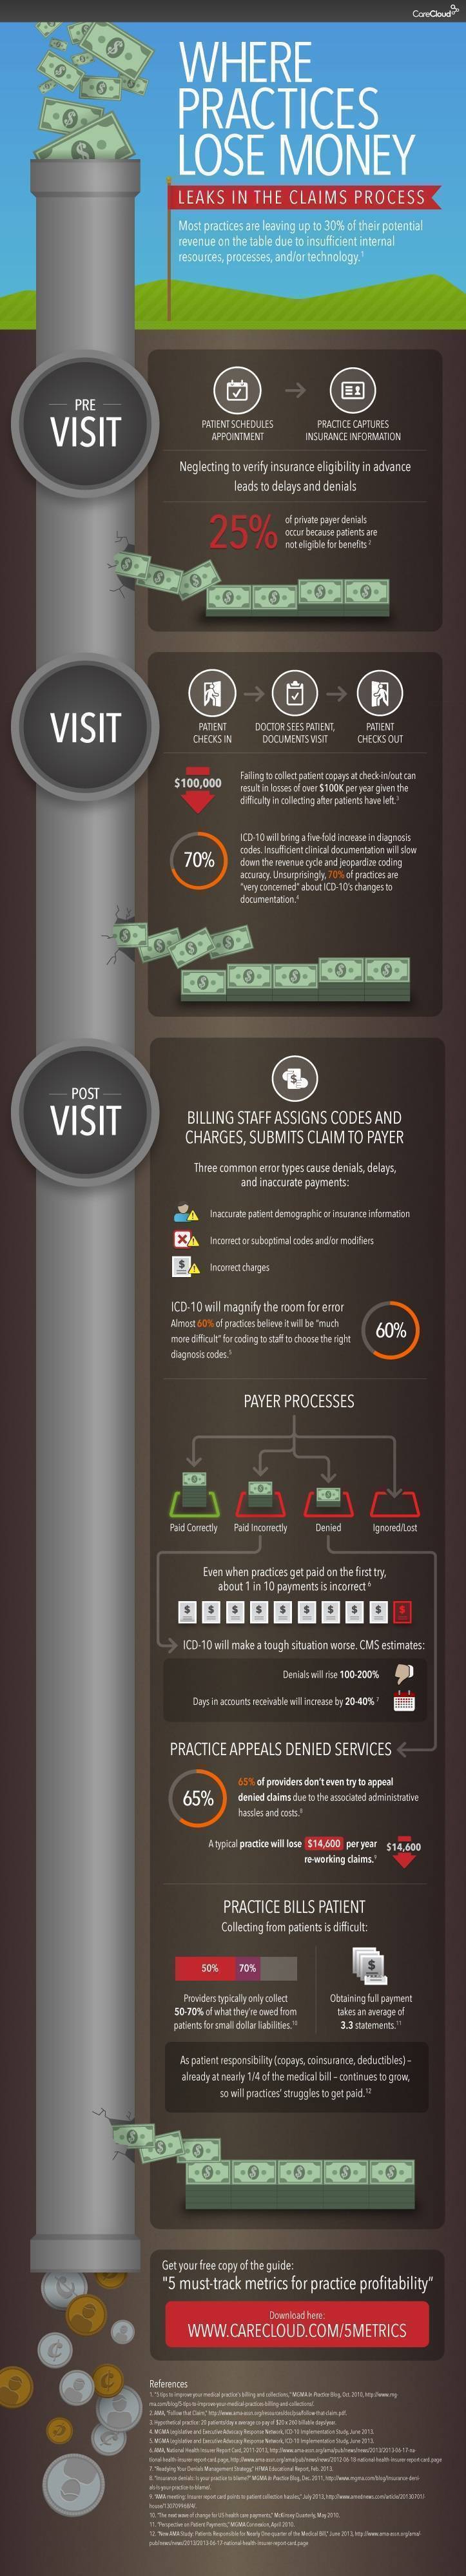 Infographic Claims Process